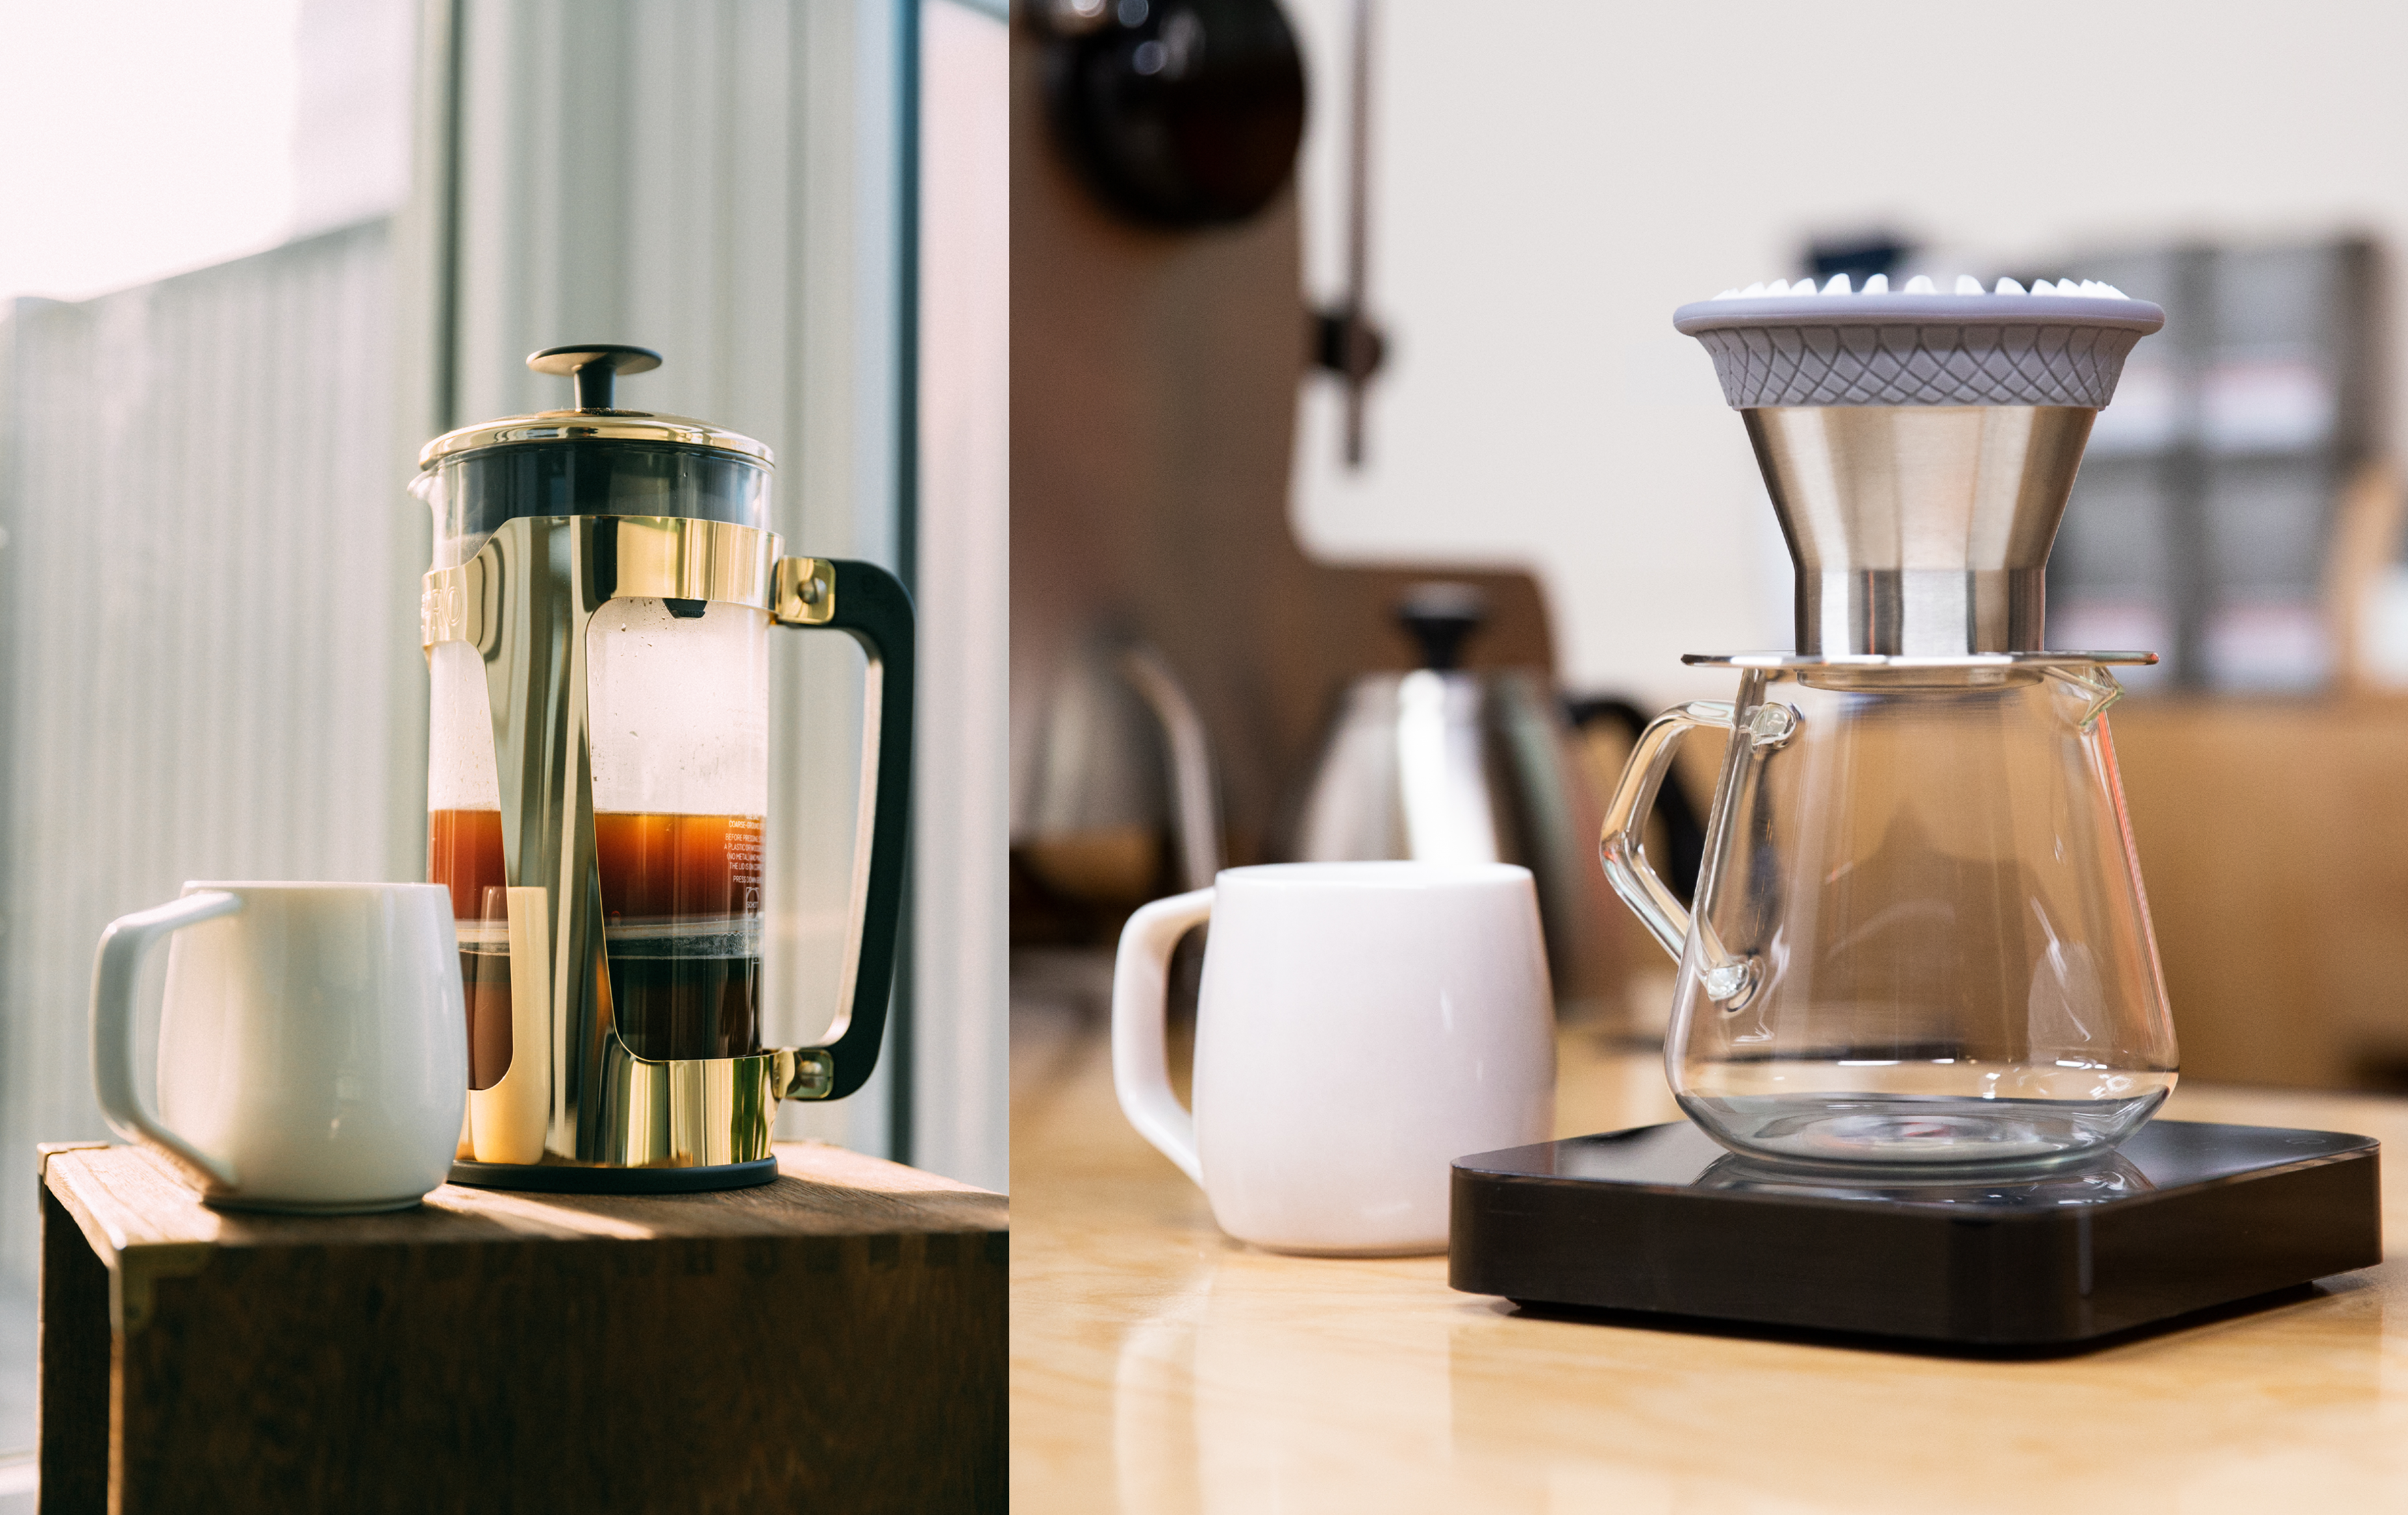 French Press vs Pour Over Coffee: Discover Which Is Better For You